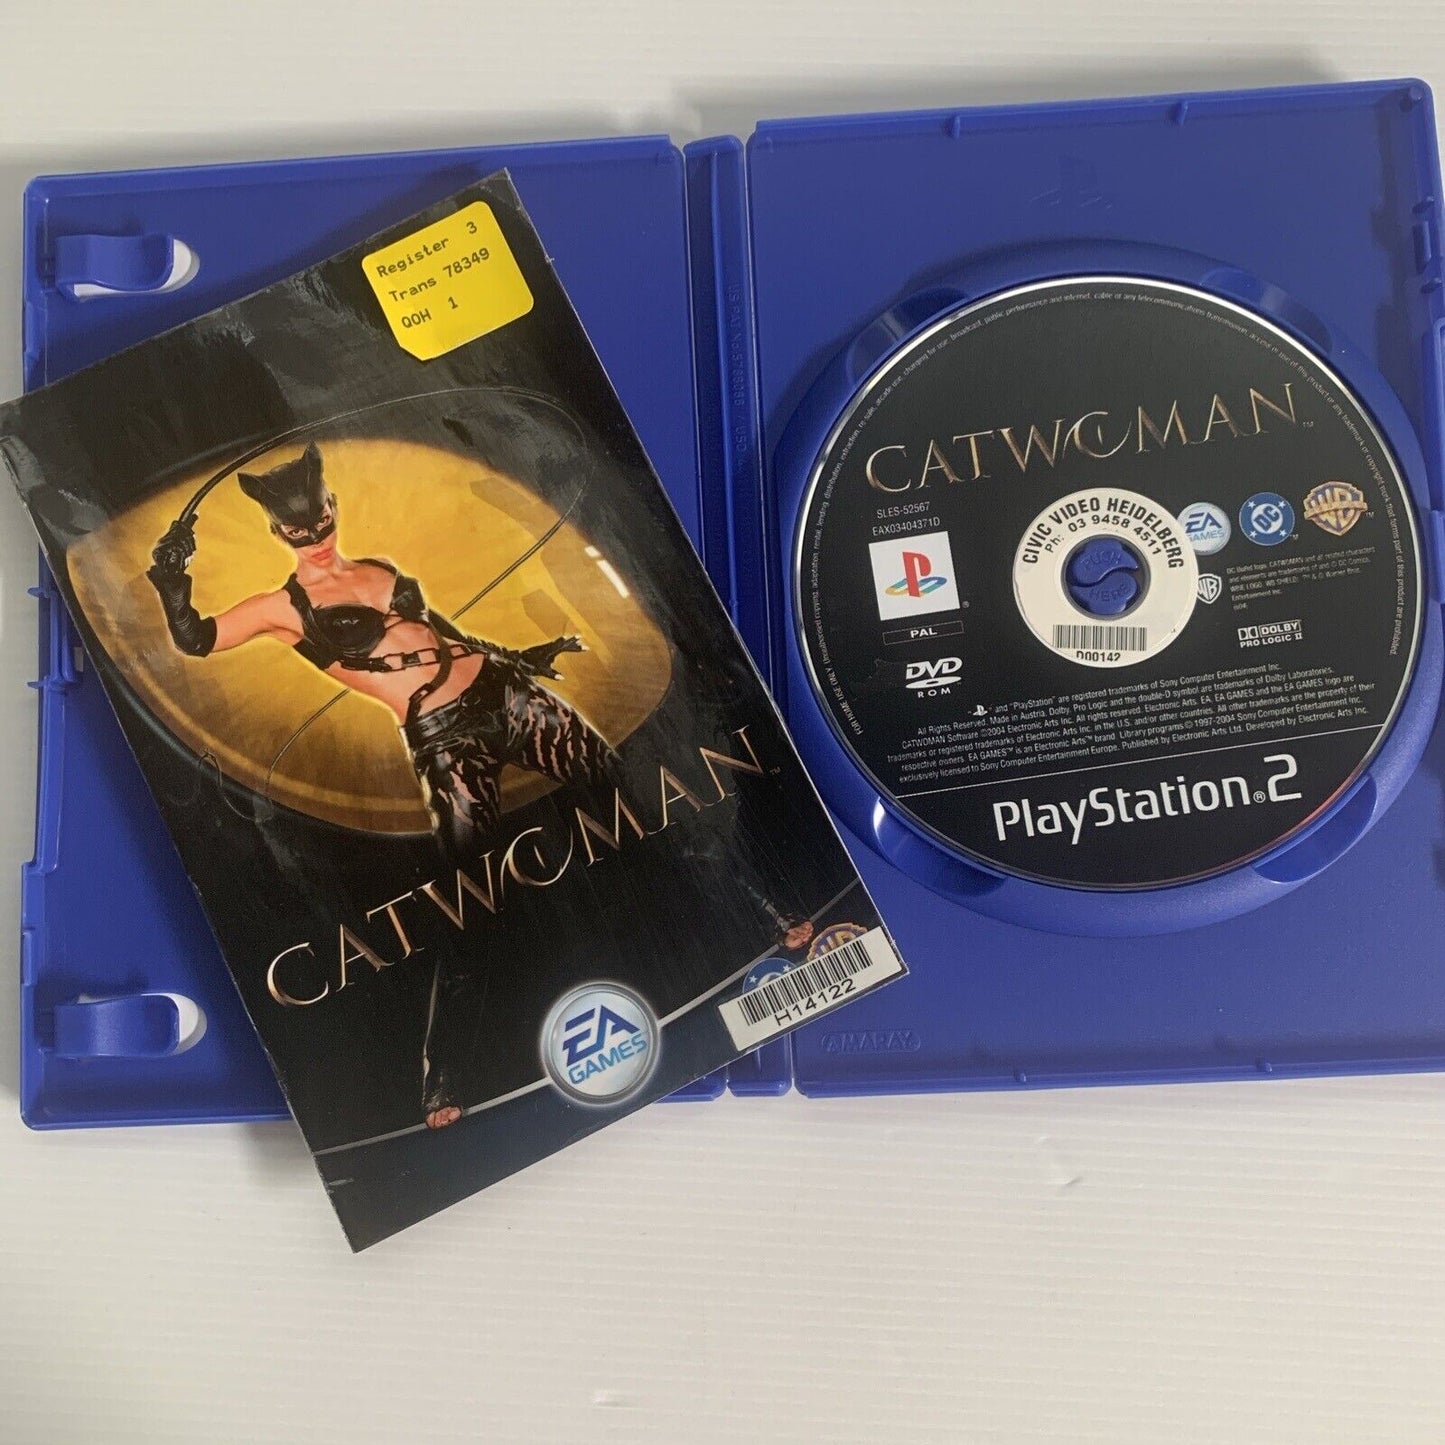 Catwoman PlayStation 2 PS2 Game